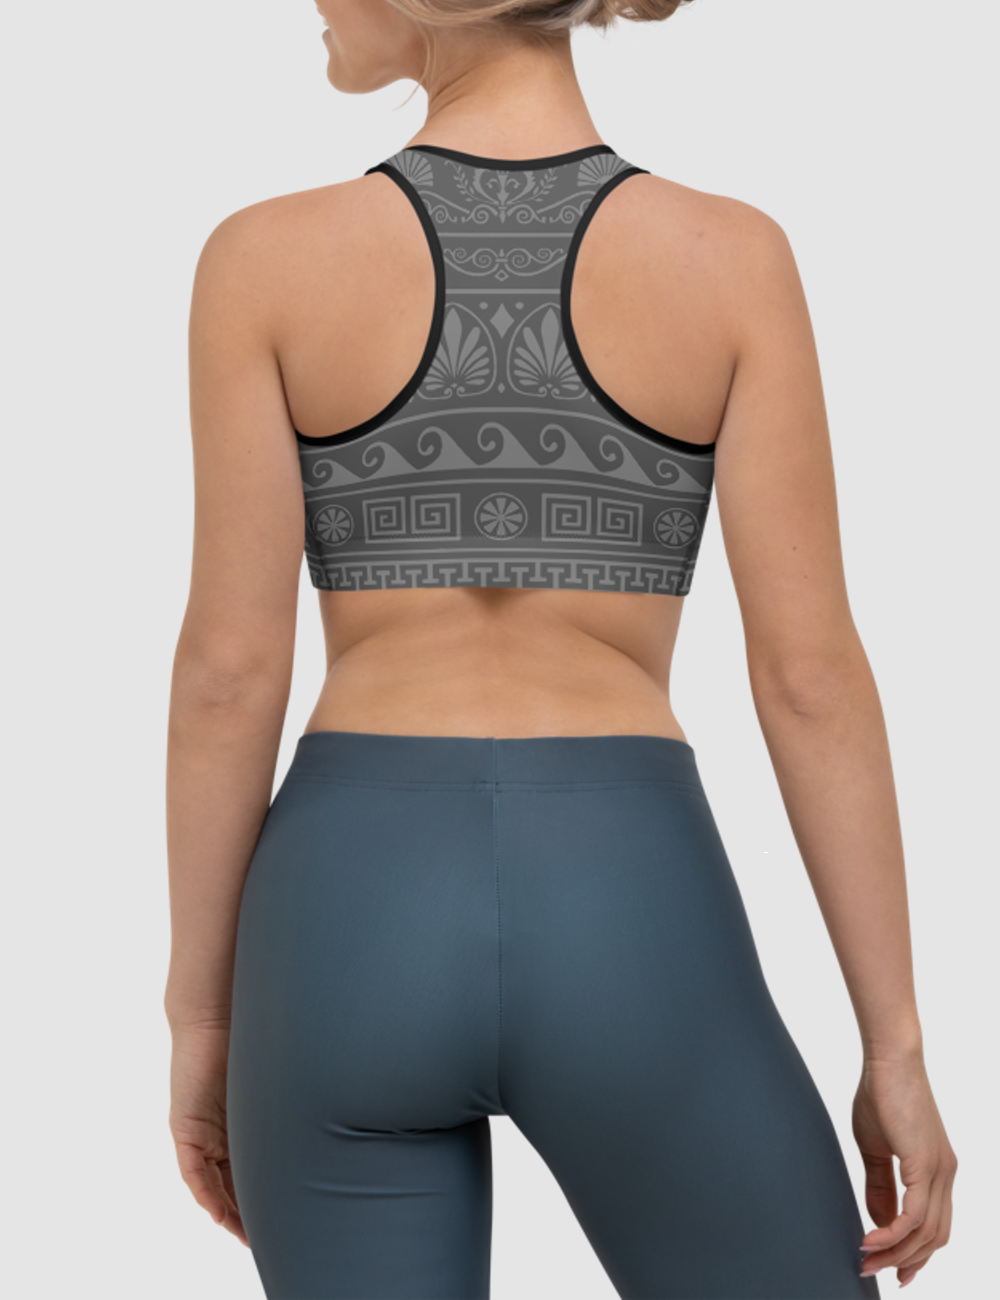 Somber Echoes Of Ancient Greece | Women's Padded Sports Bra OniTakai